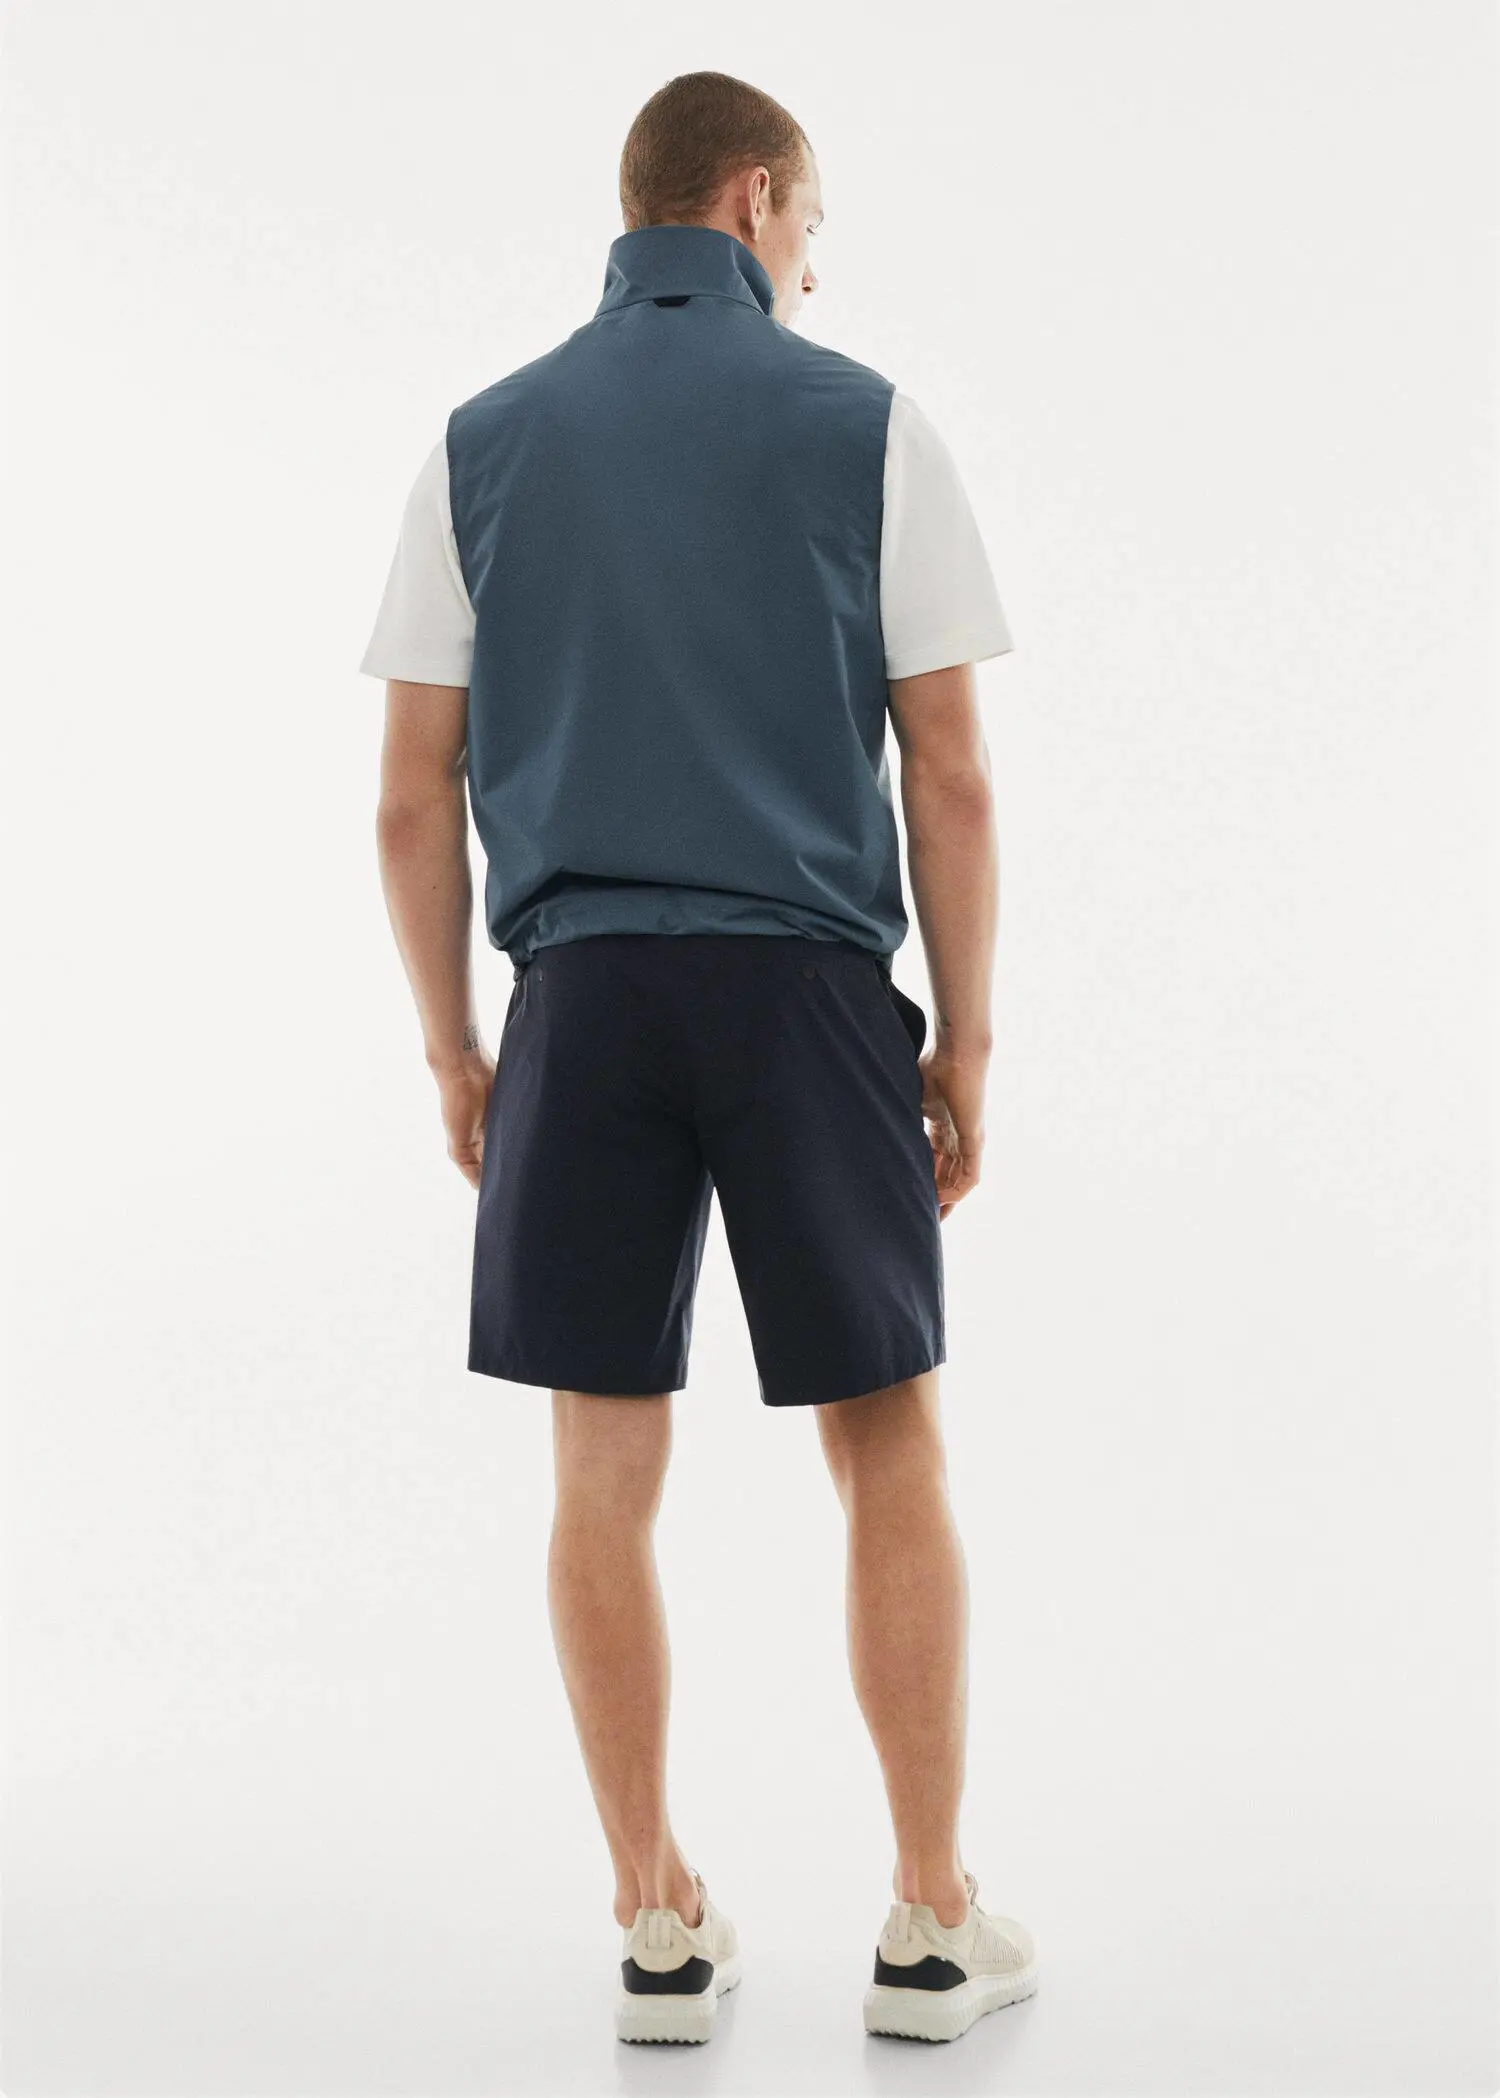 Mango Water-repellent technical gilet. a man wearing a blue vest and black shorts. 